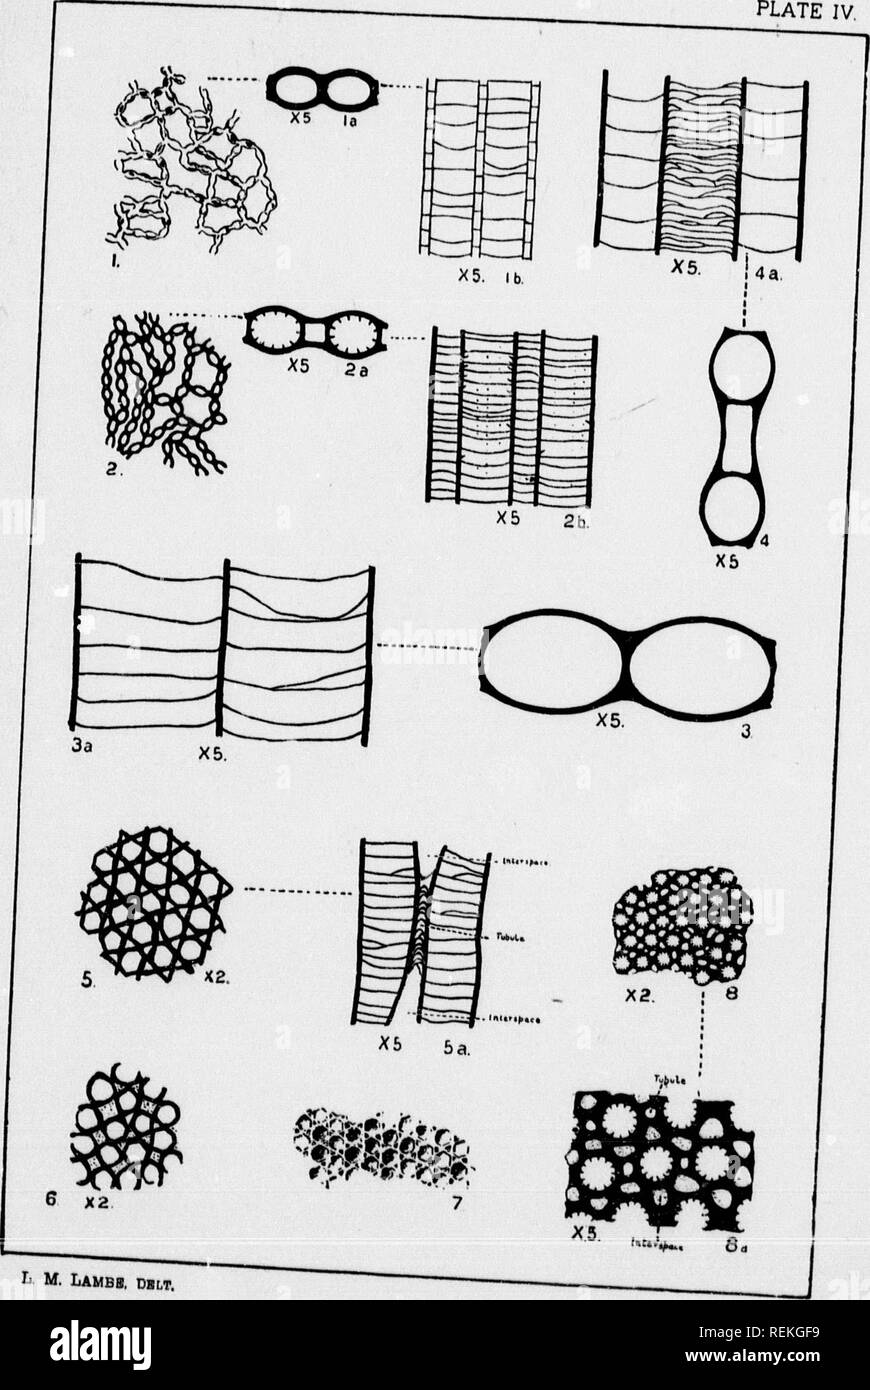 . Contributions to Canadian palaeontology [microform] : volume IV. Corals, Fossil; Paleontology; Coraux fossiles; PalÃ©ontologie. CONTR TO CAN. PAL, VOL IV PLATE IV 59). lliten, of a large smith of ]5lue he natural size, oorallitea and 80 k la Barbe, â¢lowing their leptal spineH. &quot;0 mouth of tiiral size. i-om L'Anse nt dfnclop. allties and from the triang'ilivr he section shows an th nearly &lt;â Twice it side of len from g, Que.. L M. Lambb, Dblt,. Please note that these images are extracted from scanned page images that may have been digitally enhanced for readability - coloration and a Stock Photo